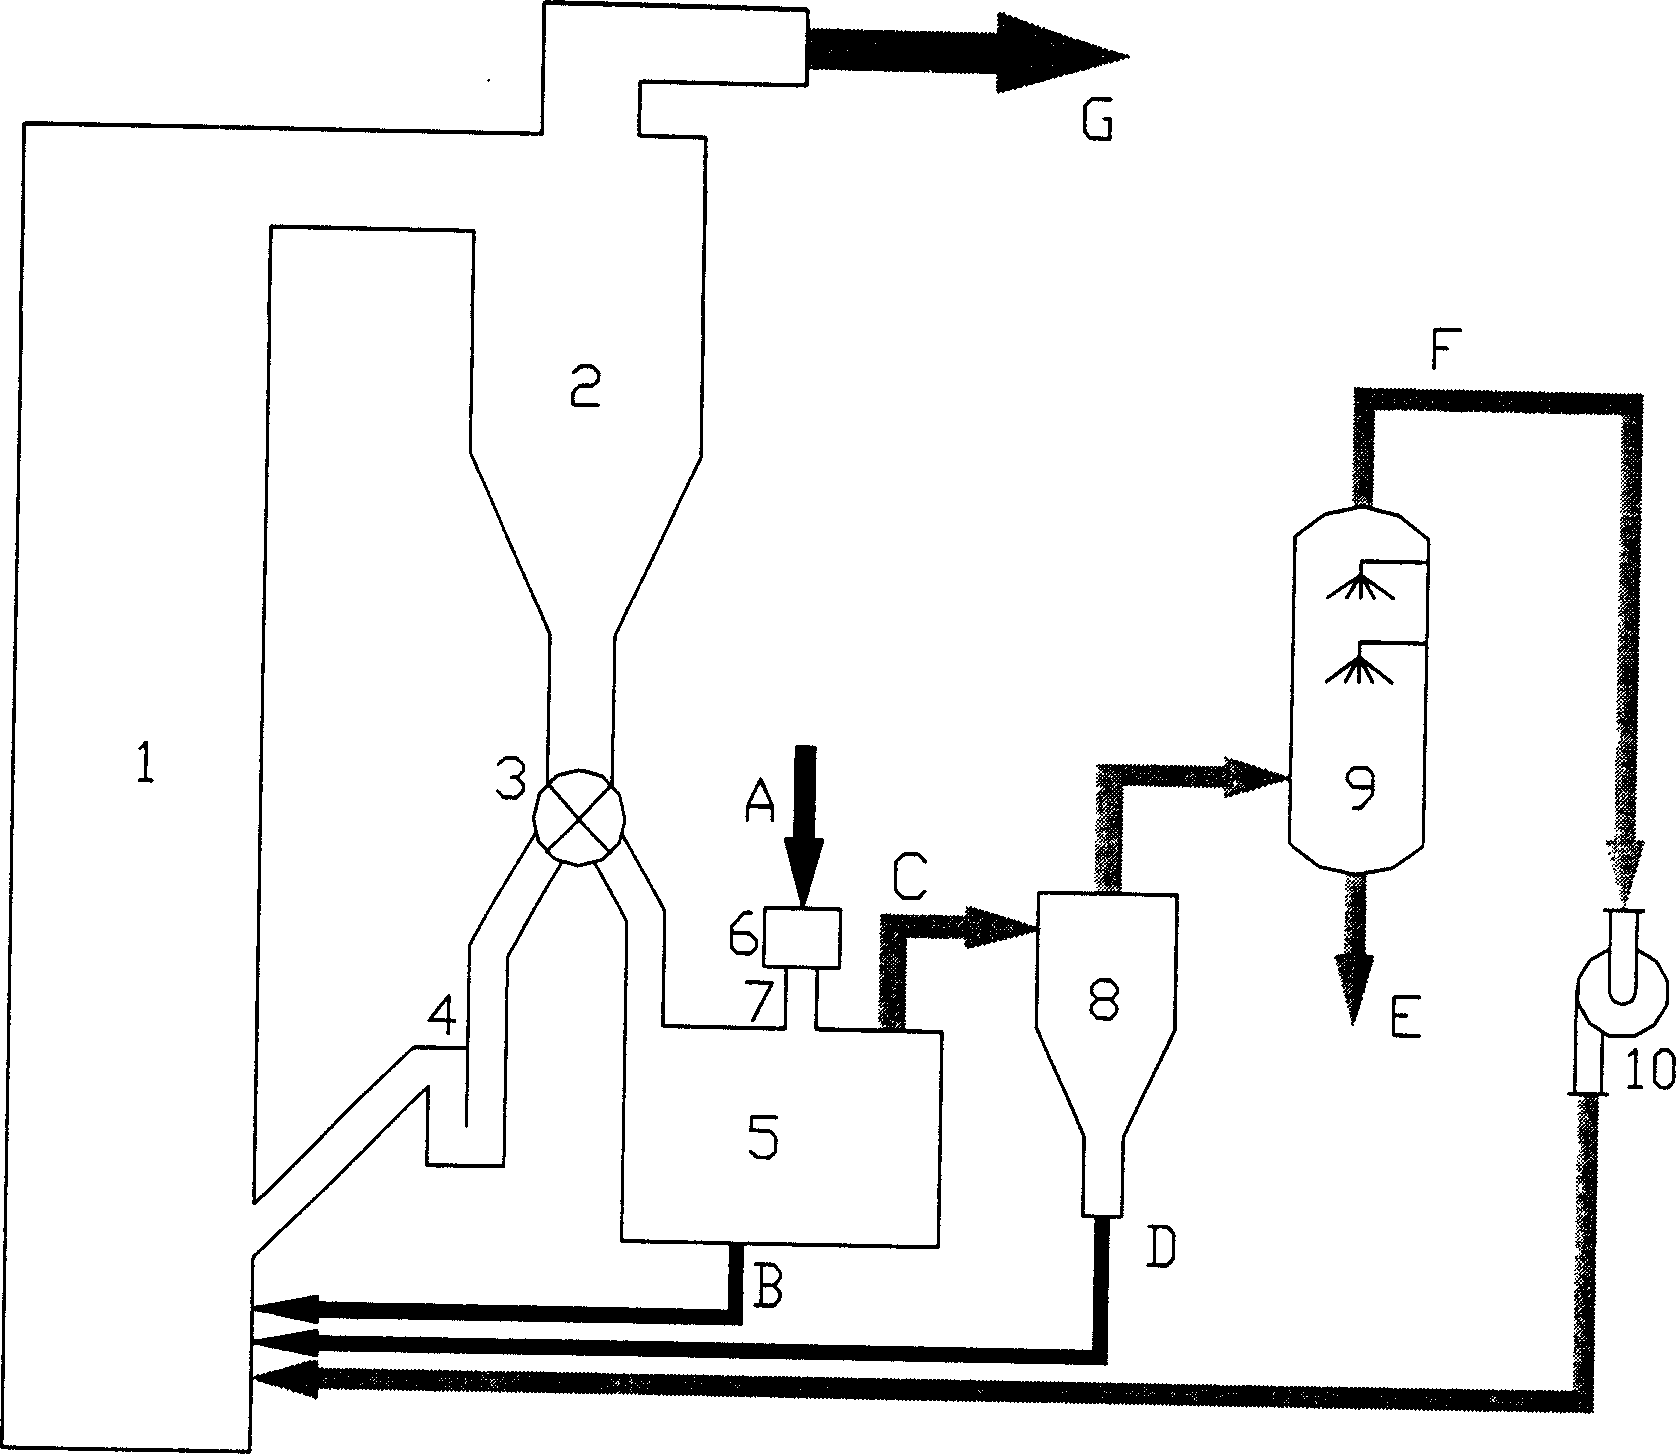 Wet sludge drying and incinerating treatment method employing circulating fluidized bed with particle dryer